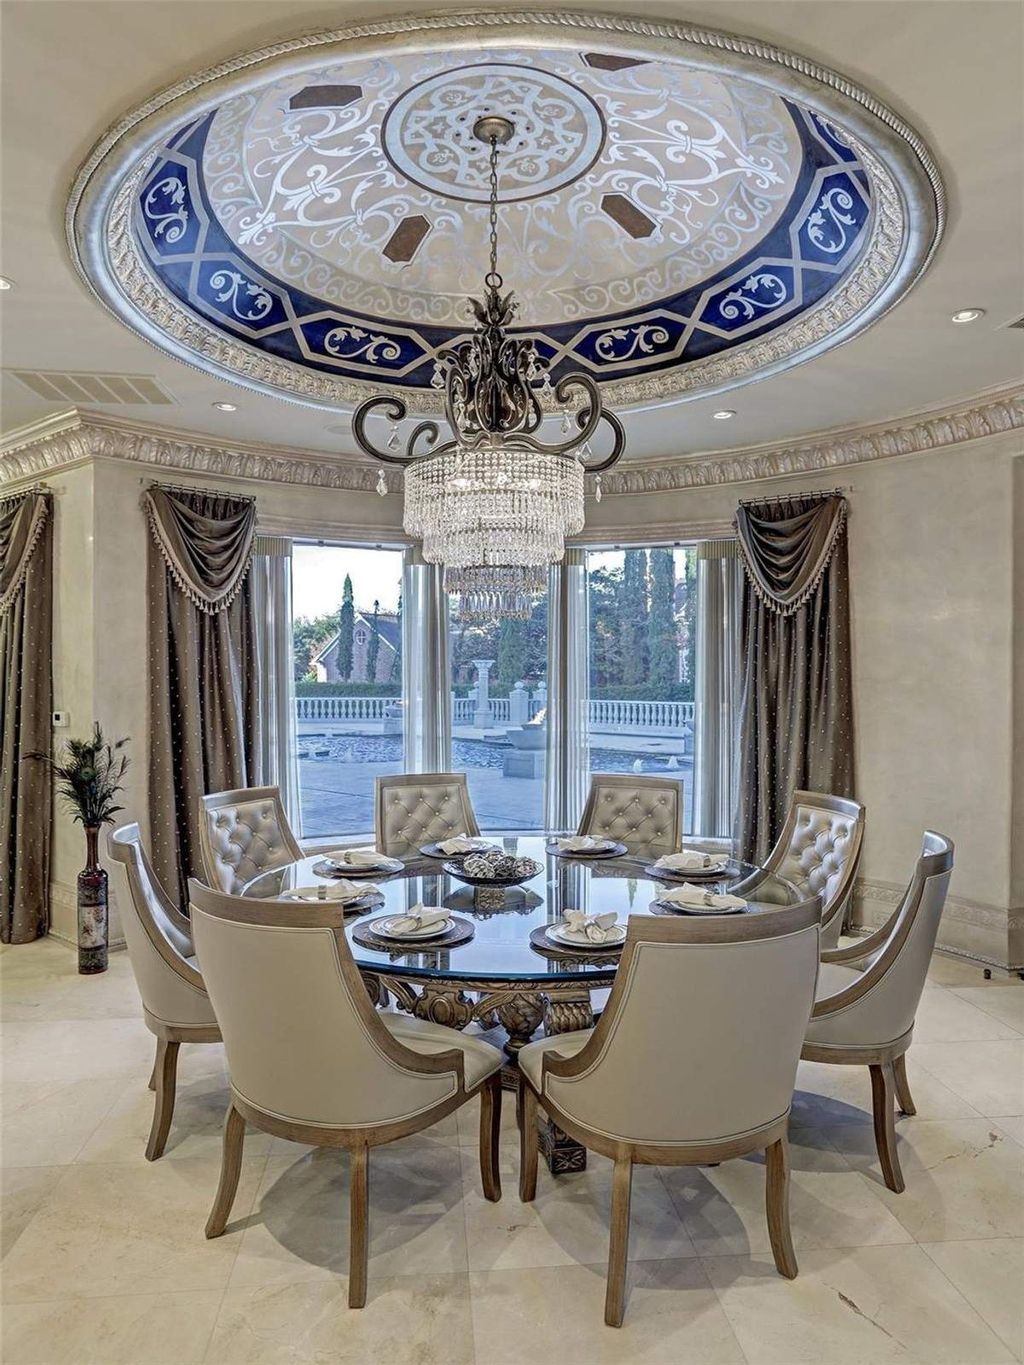 The Residence in Sugar Land, a exquisite palatial style estate constructed with many detailed and intricate moldings, marble floors, Venetian plaster walls, custom cabinetry and ornate finishes, gold leaf accents, and crystal chandeliers. This home located at 5324 Palm Royale Blvd, Sugar Land, Texas